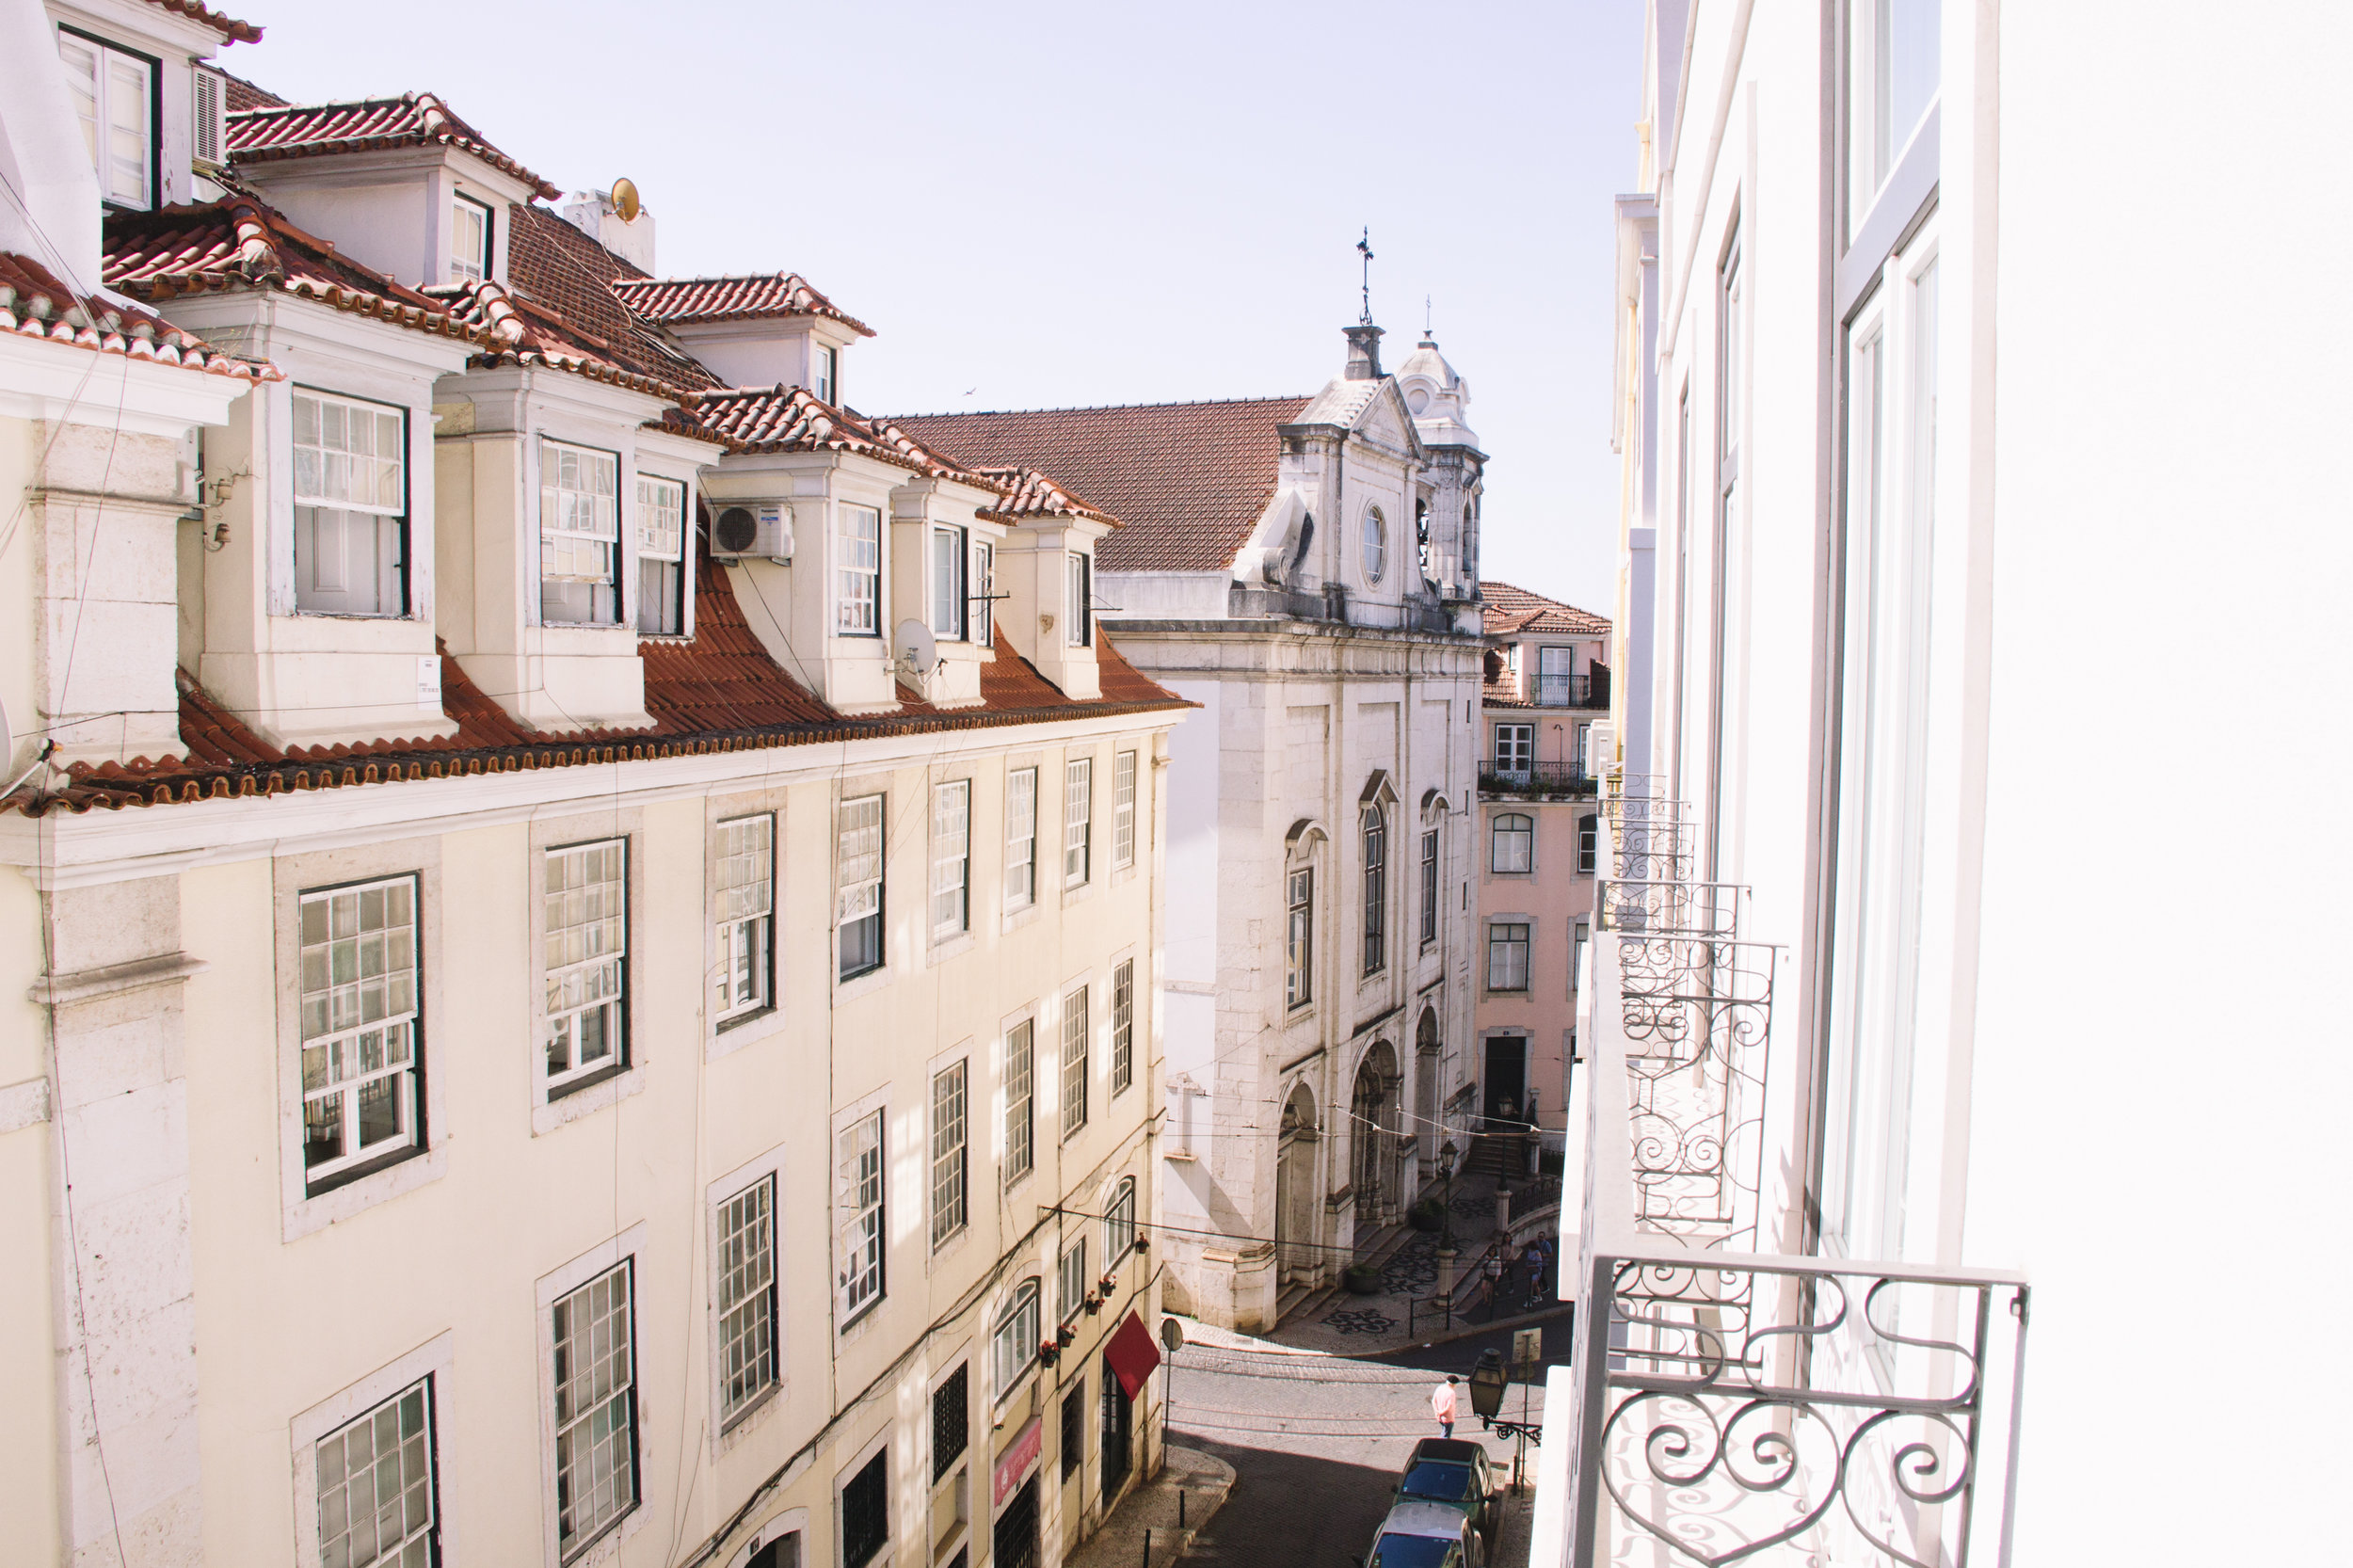 Roof top views from our balcony in Lisbon